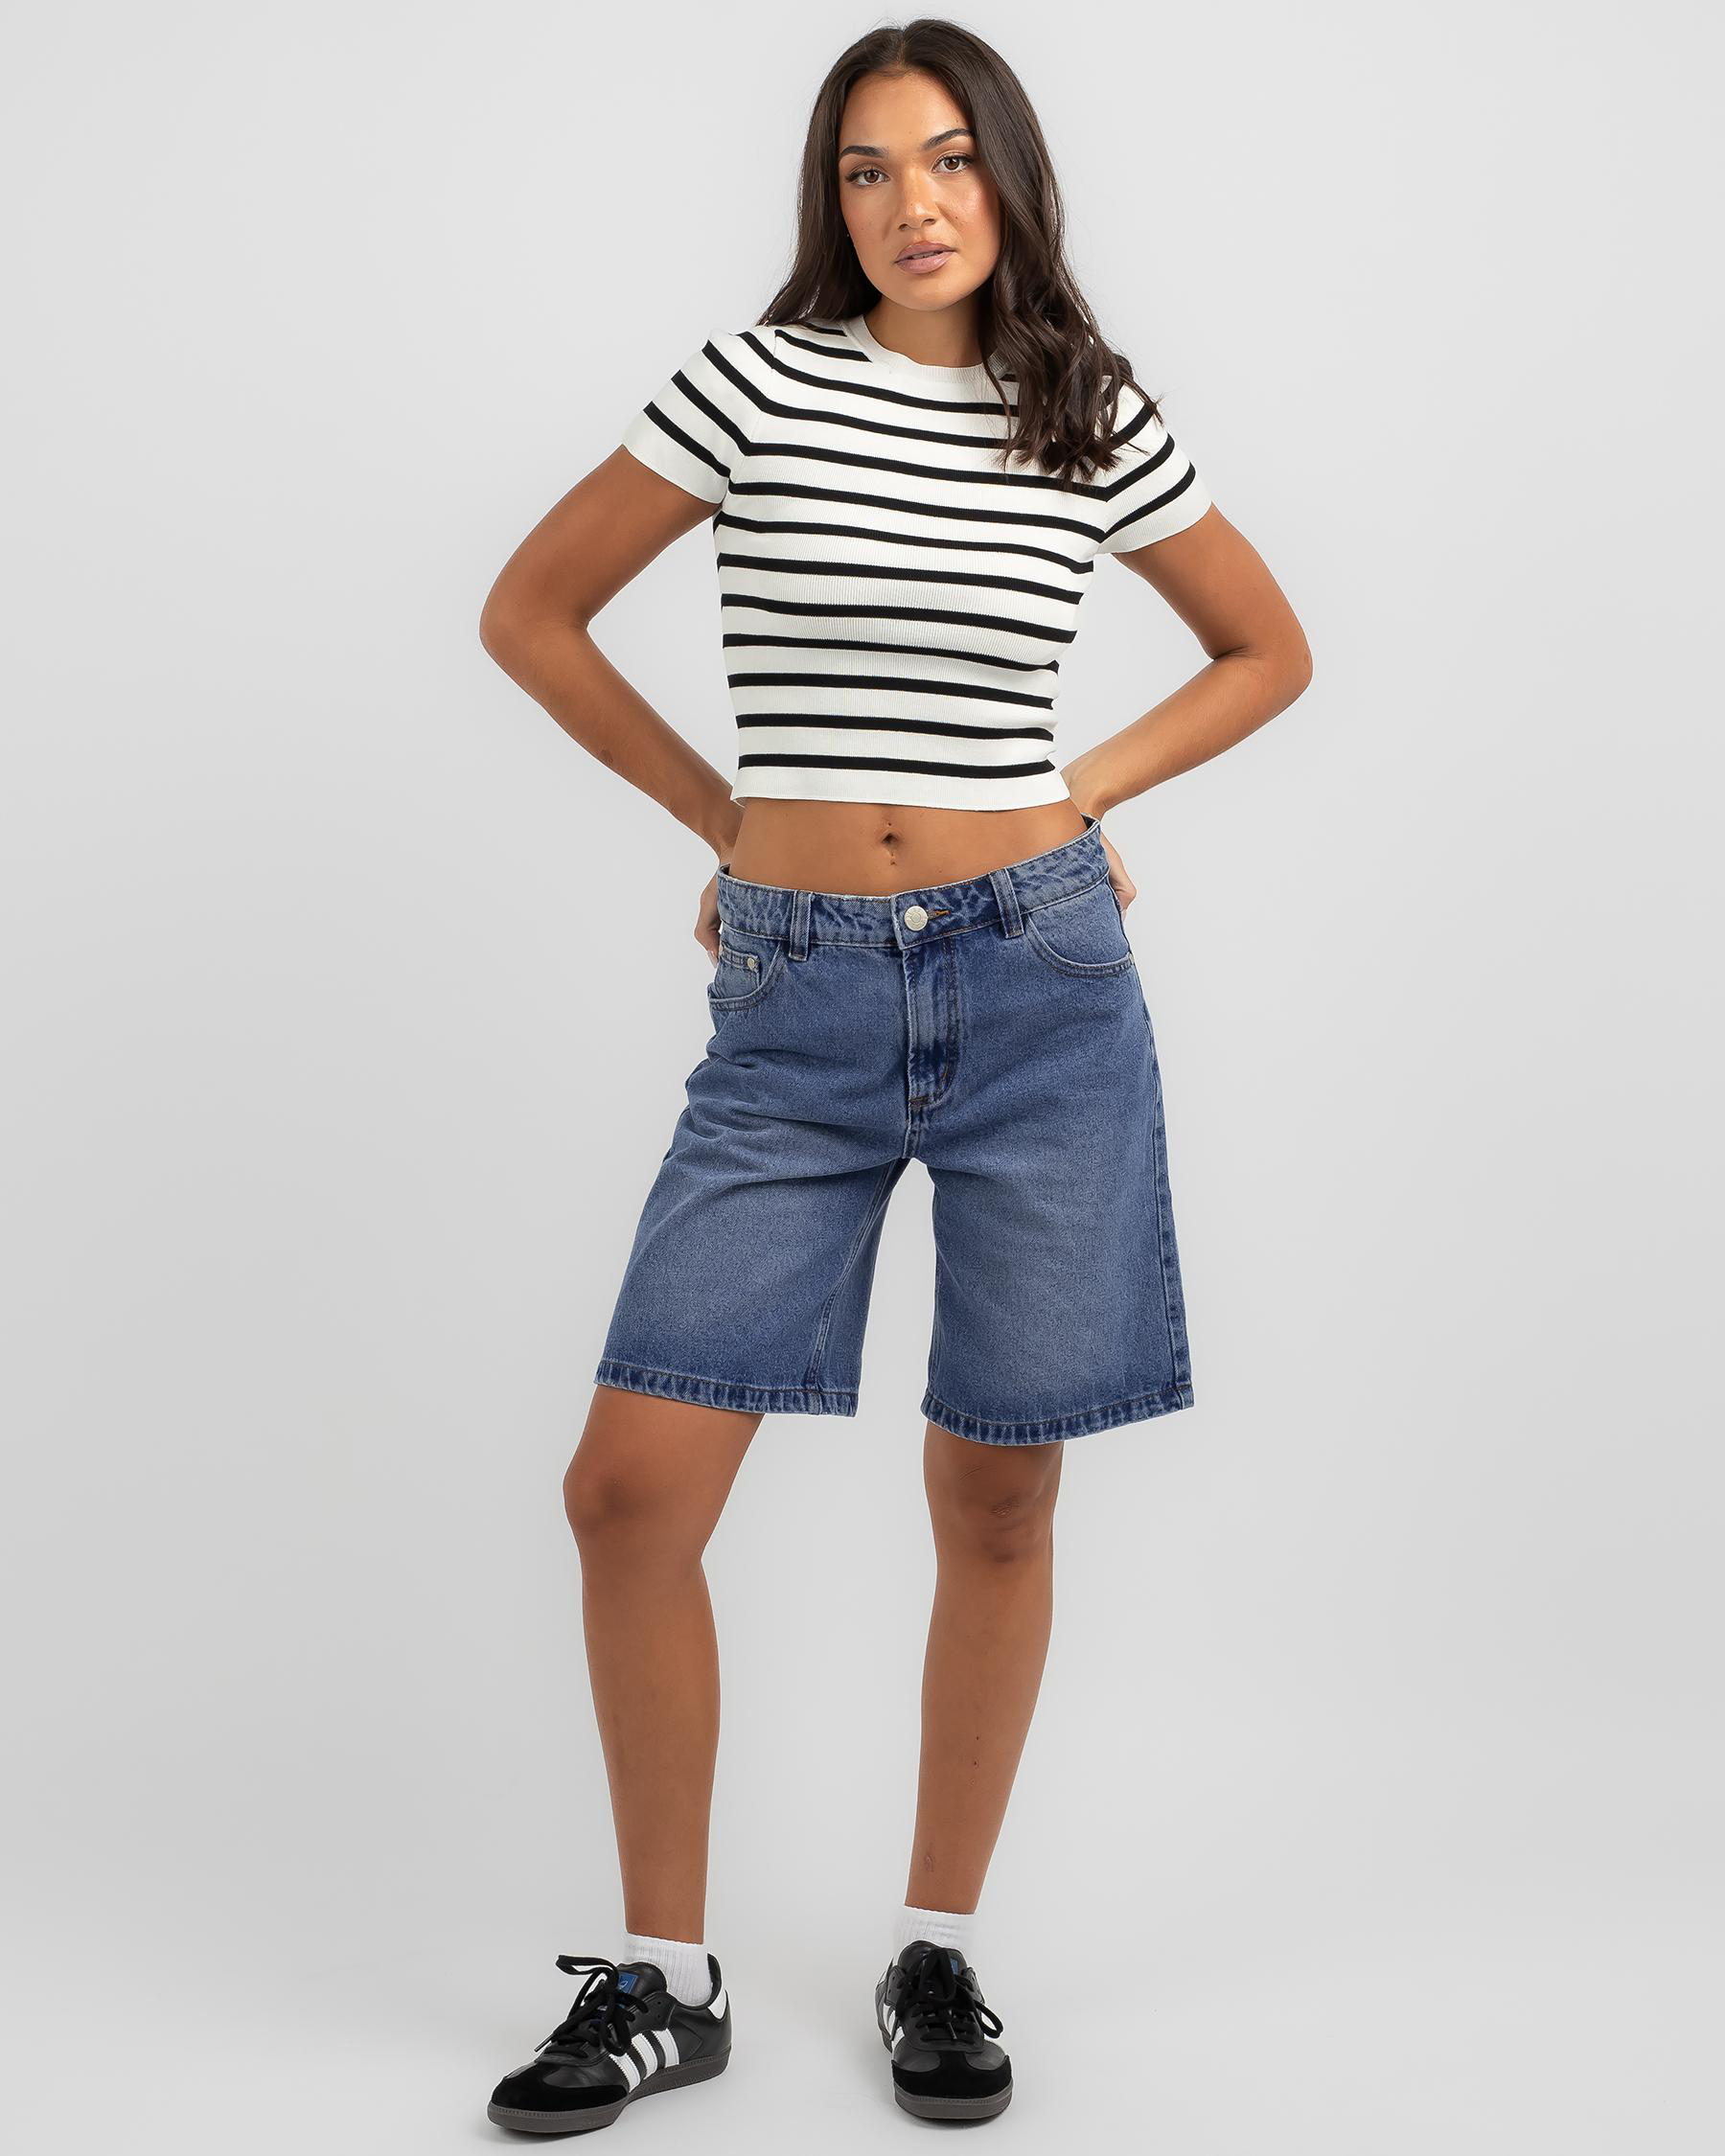 Shop Ava And Ever Basic Knit Tee In Black/cream Stripe - Fast Shipping ...